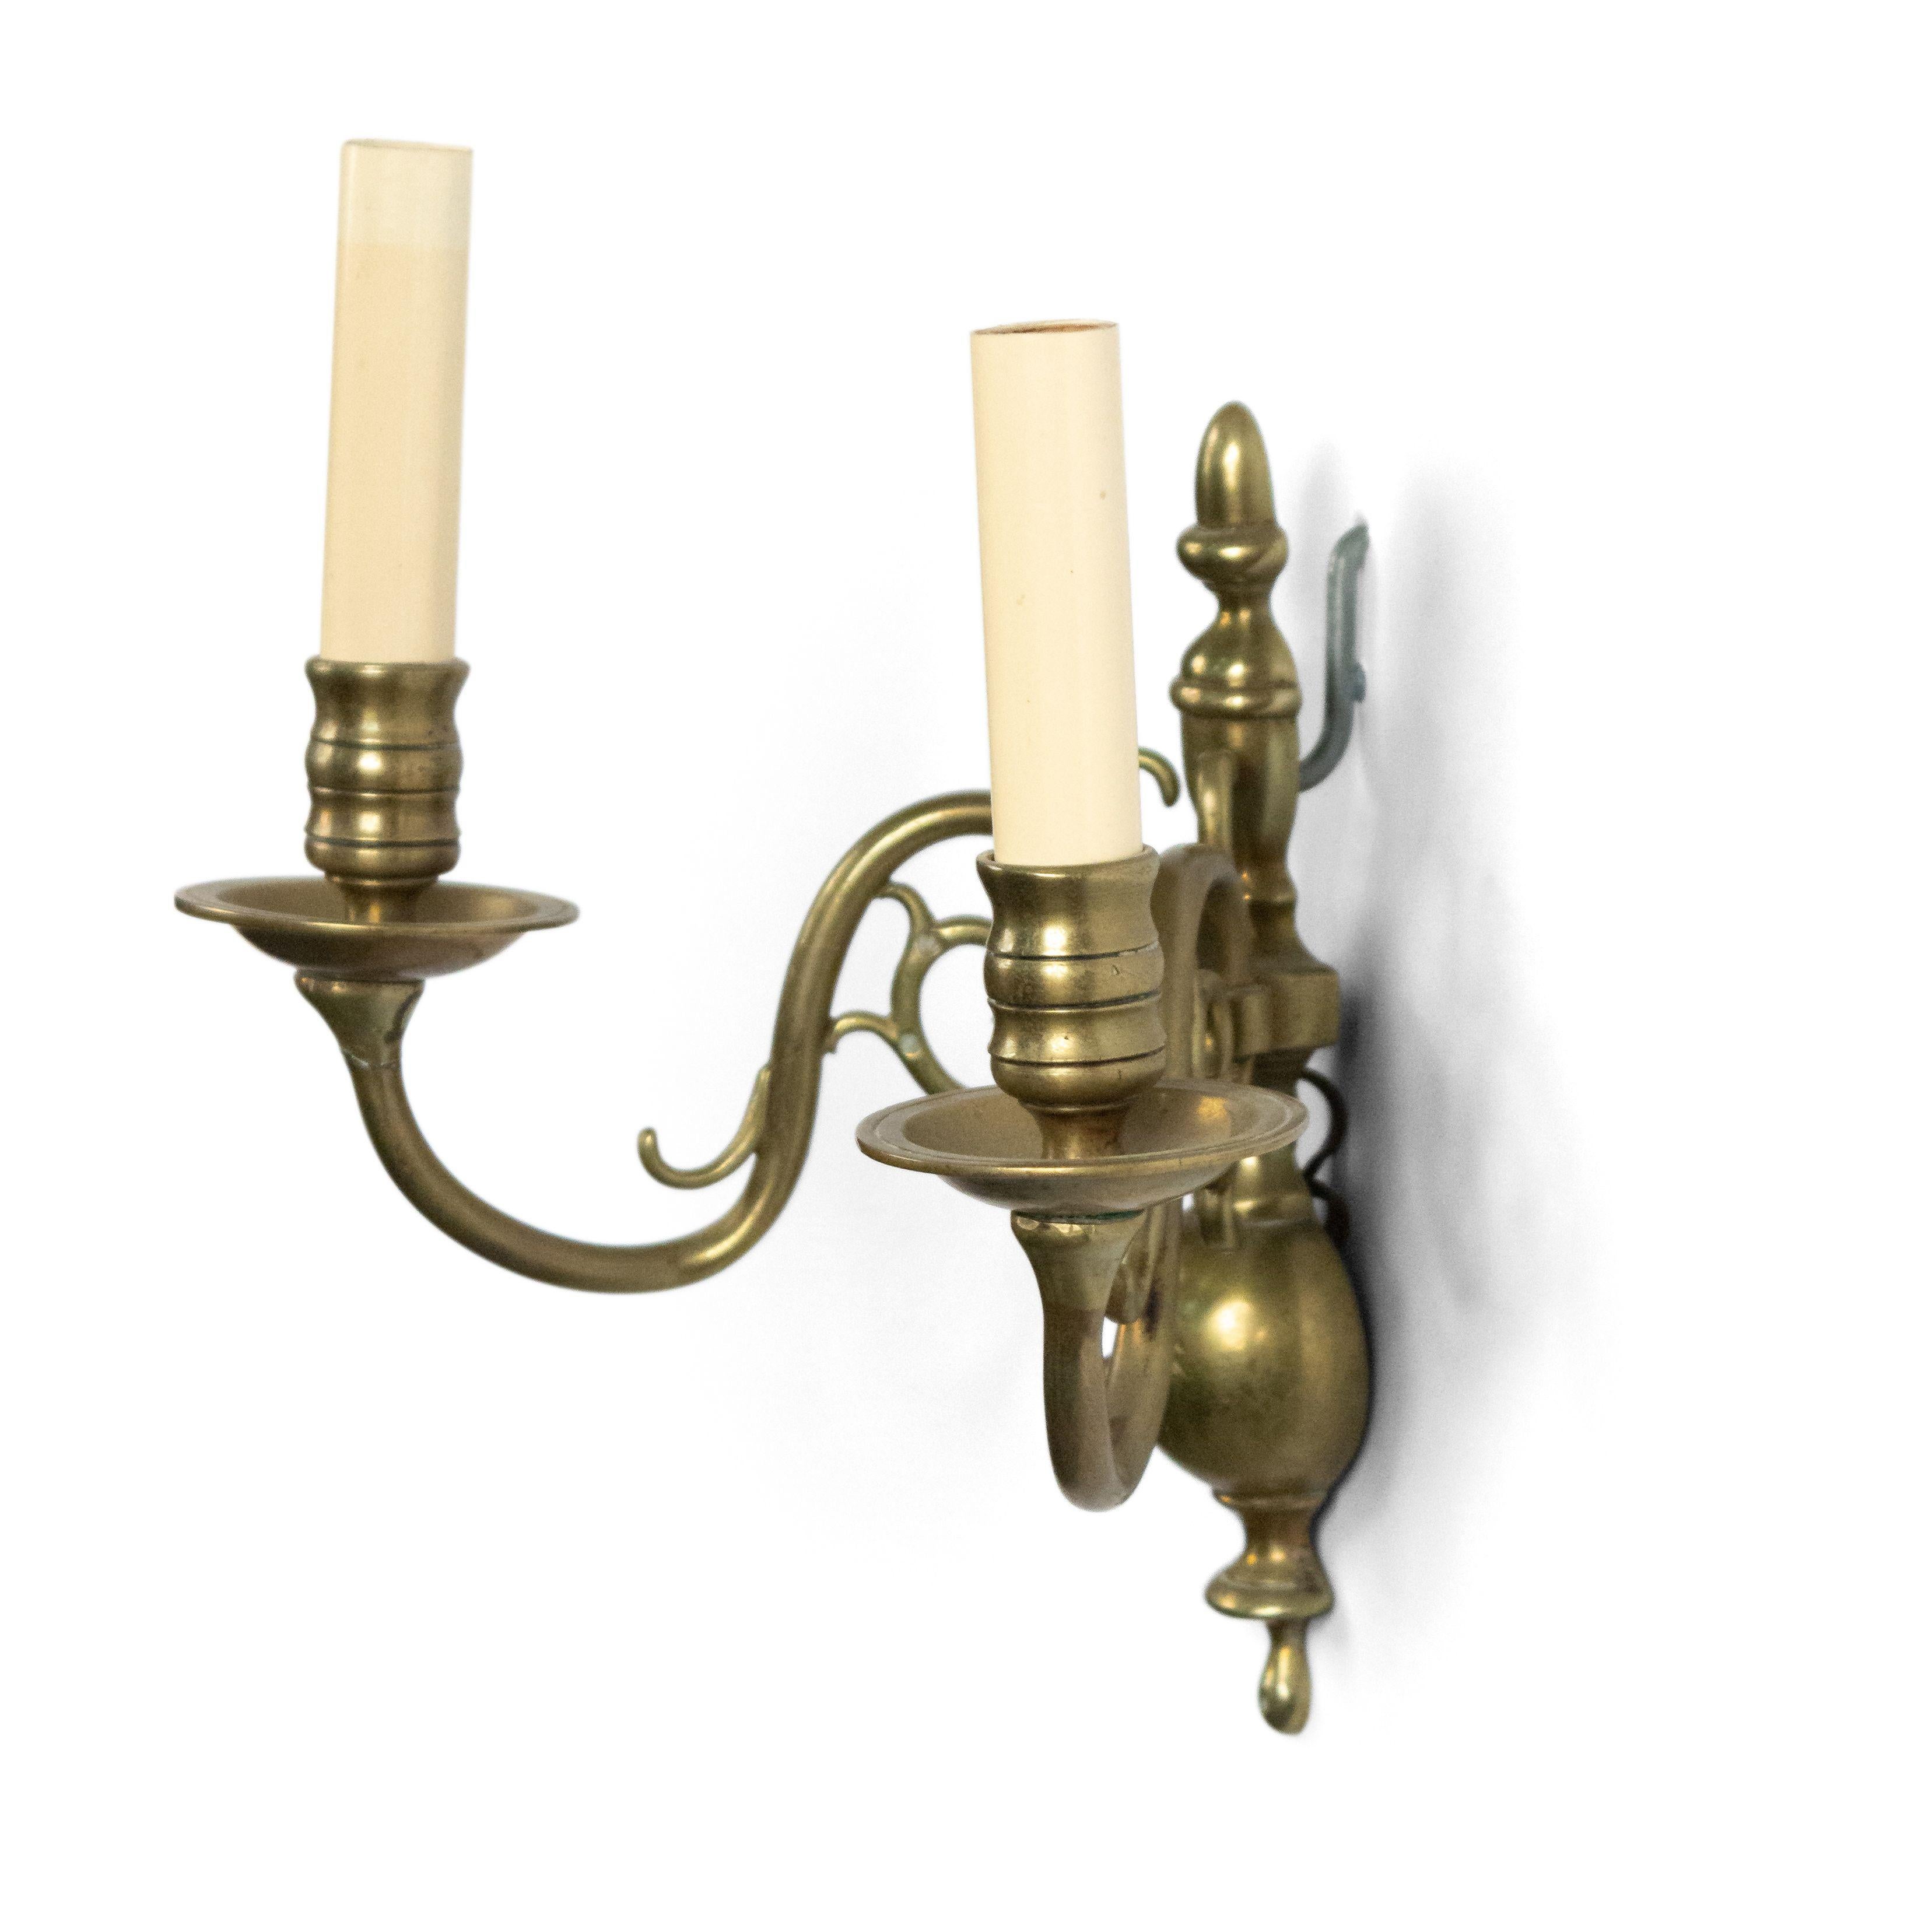 Pair of English Georgian style brass 2-arm wall sconces with scrolling arms and slender vasiform backplate, 20th century.